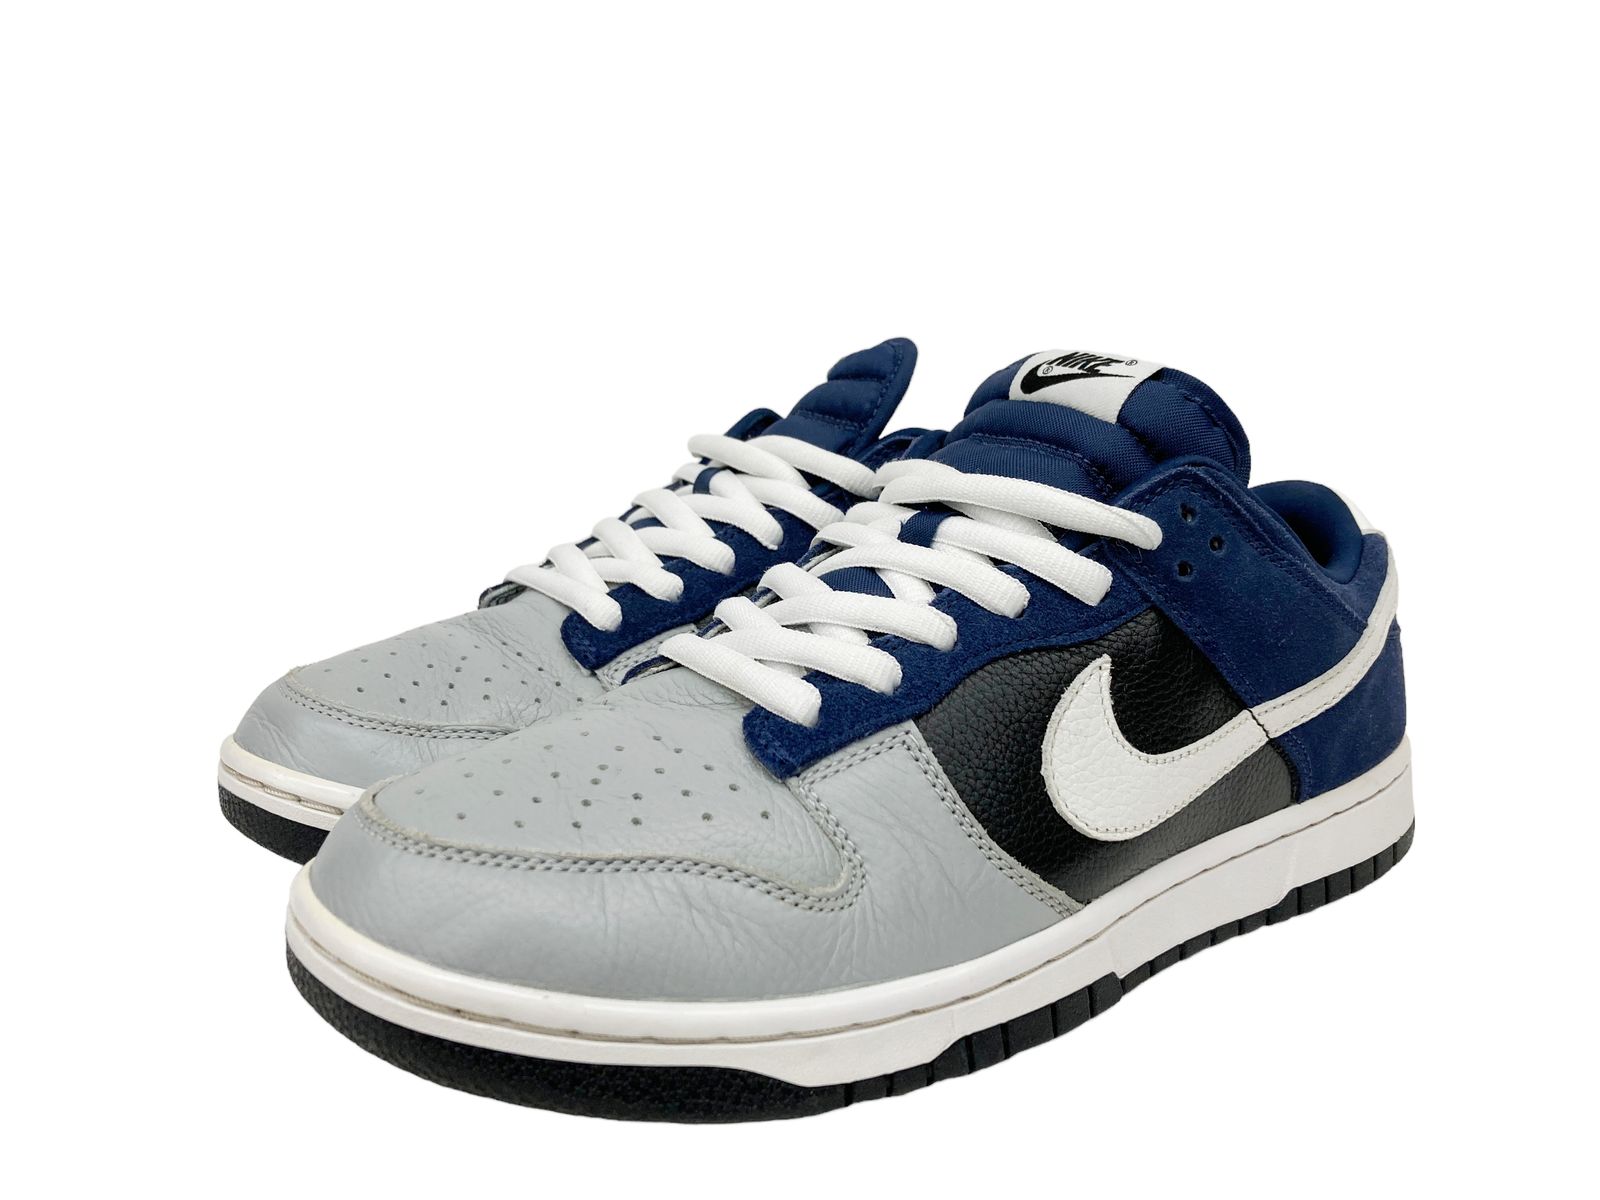 NIKE (ナイキ) BY YOU DUNK LOW バイユー ダンク ロー レザー×スエード ...